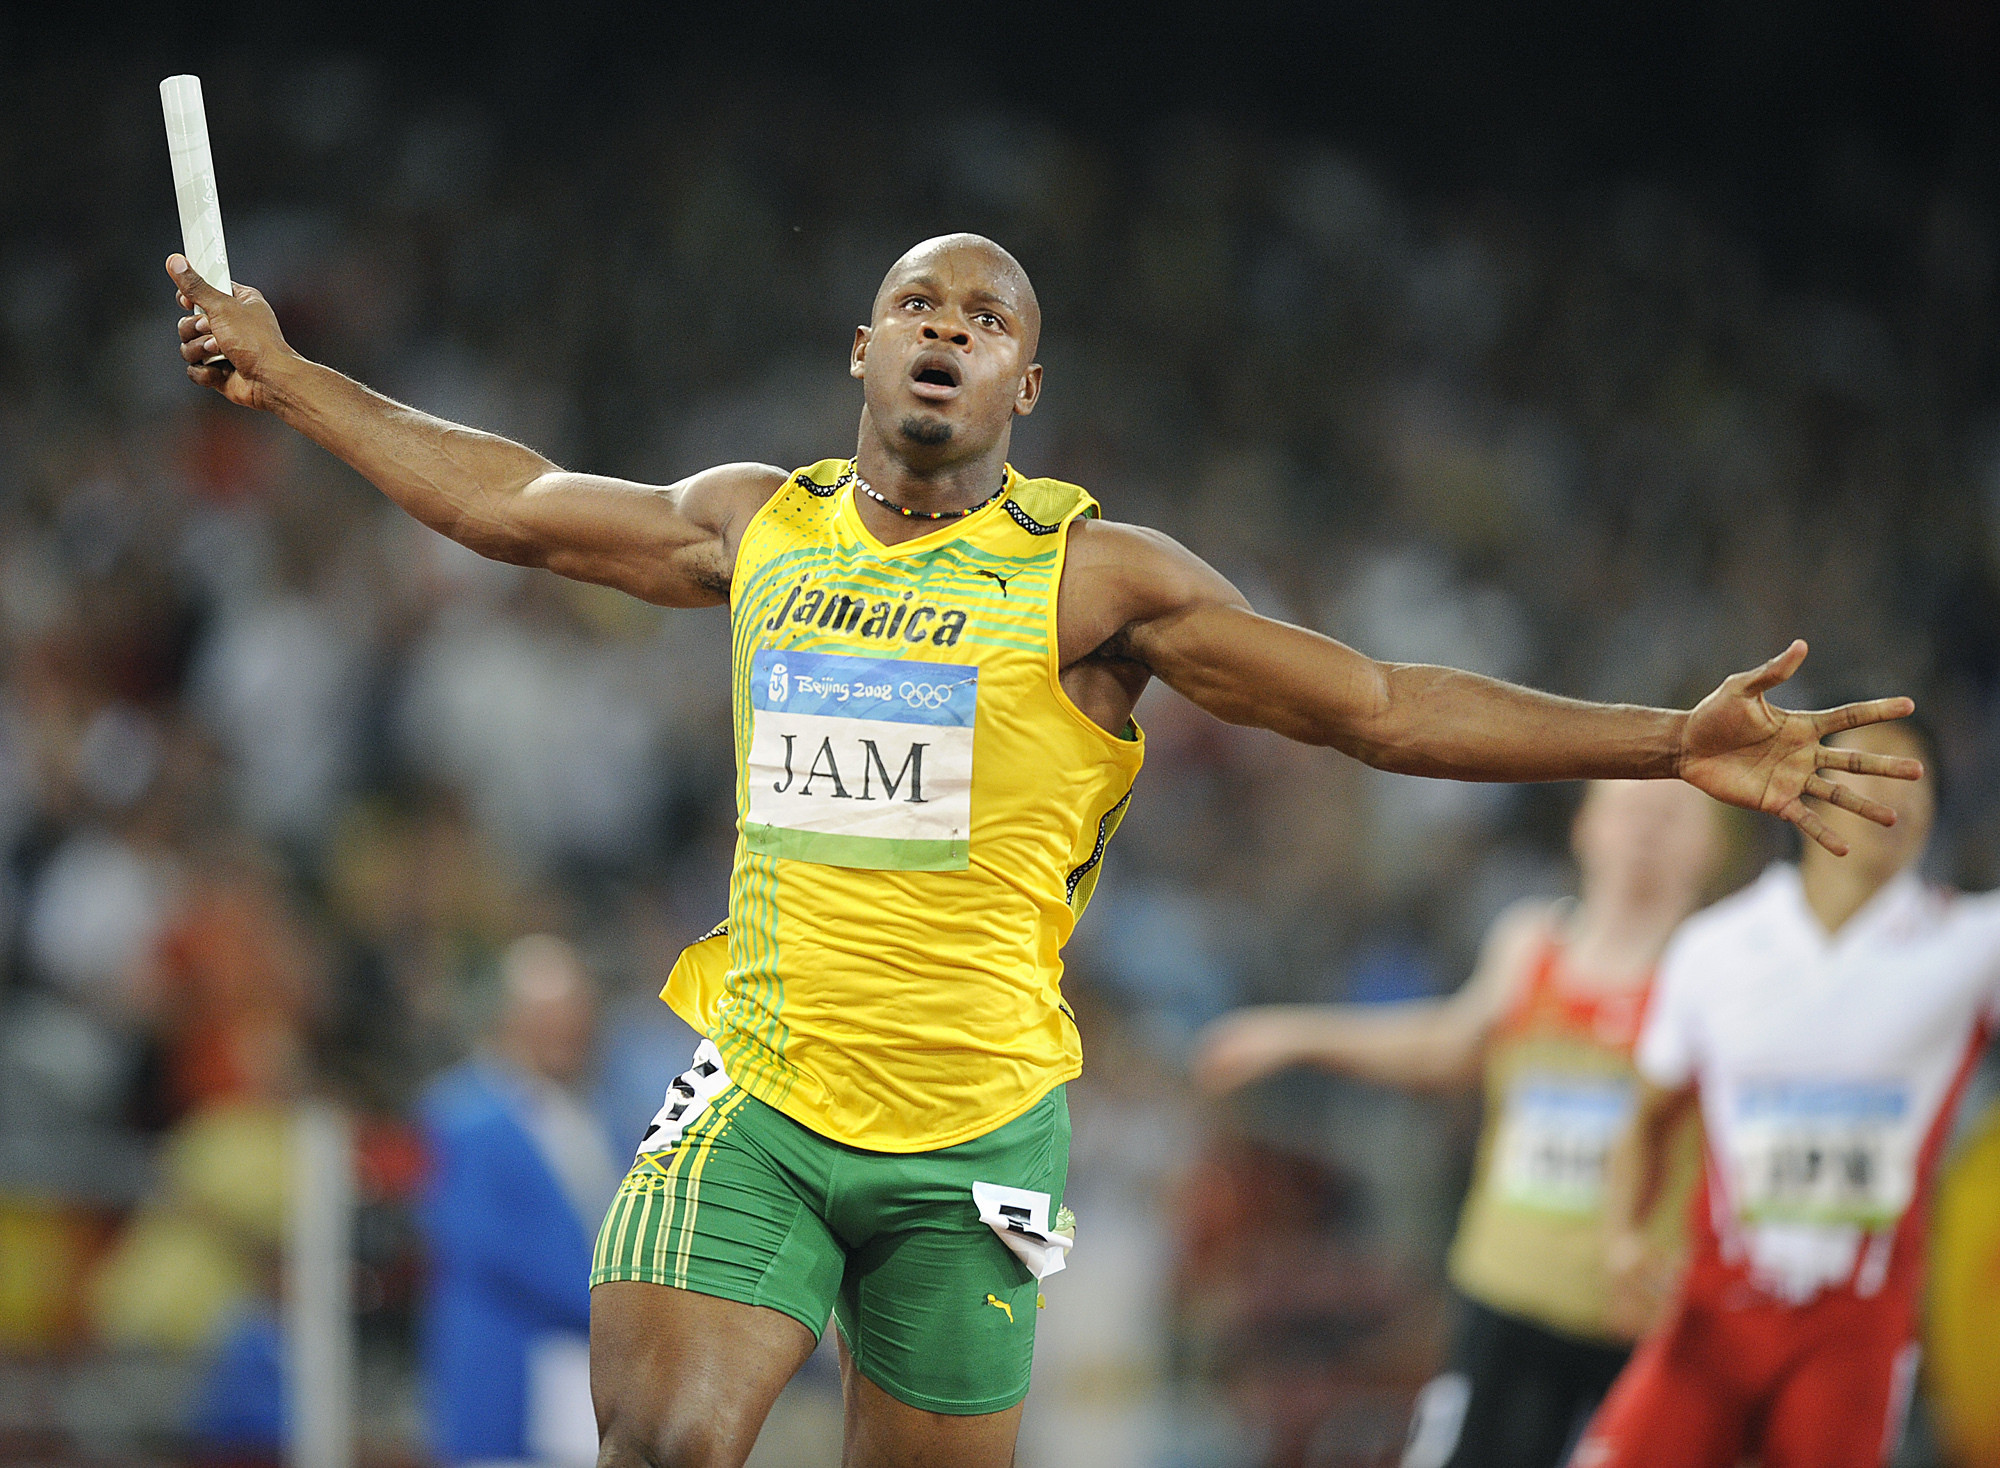 Asafa Powell leads strong Jamaican contingent at NYRR Millrose Games